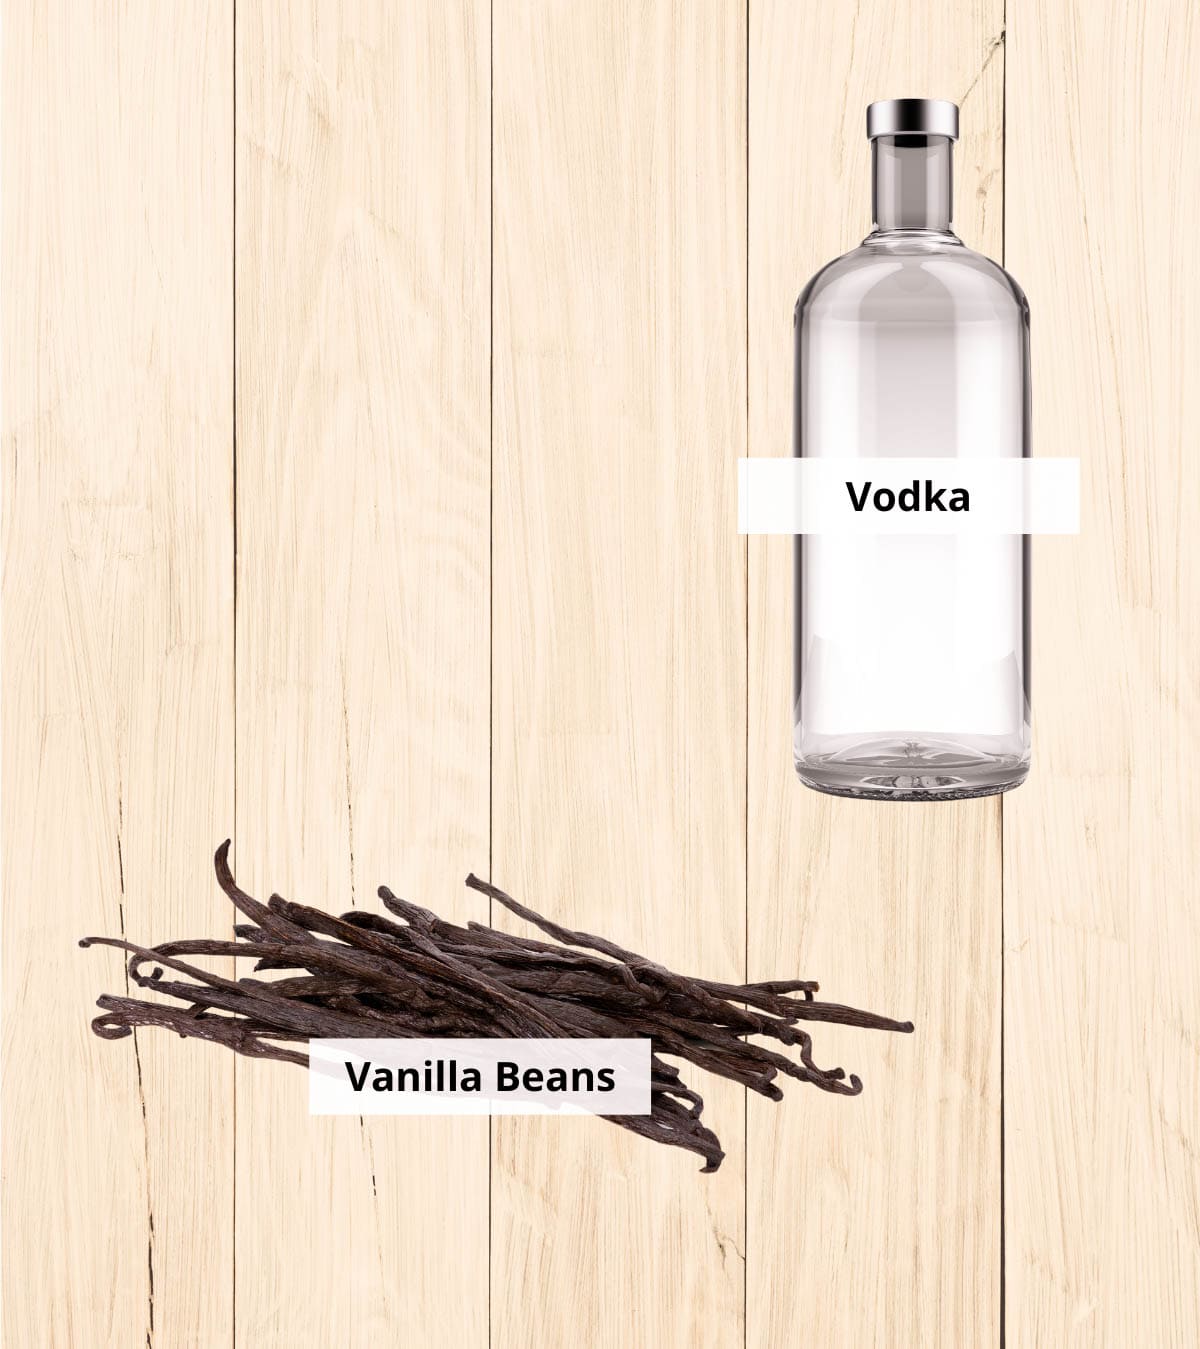 Ingredients for how to make vanilla extract at home.